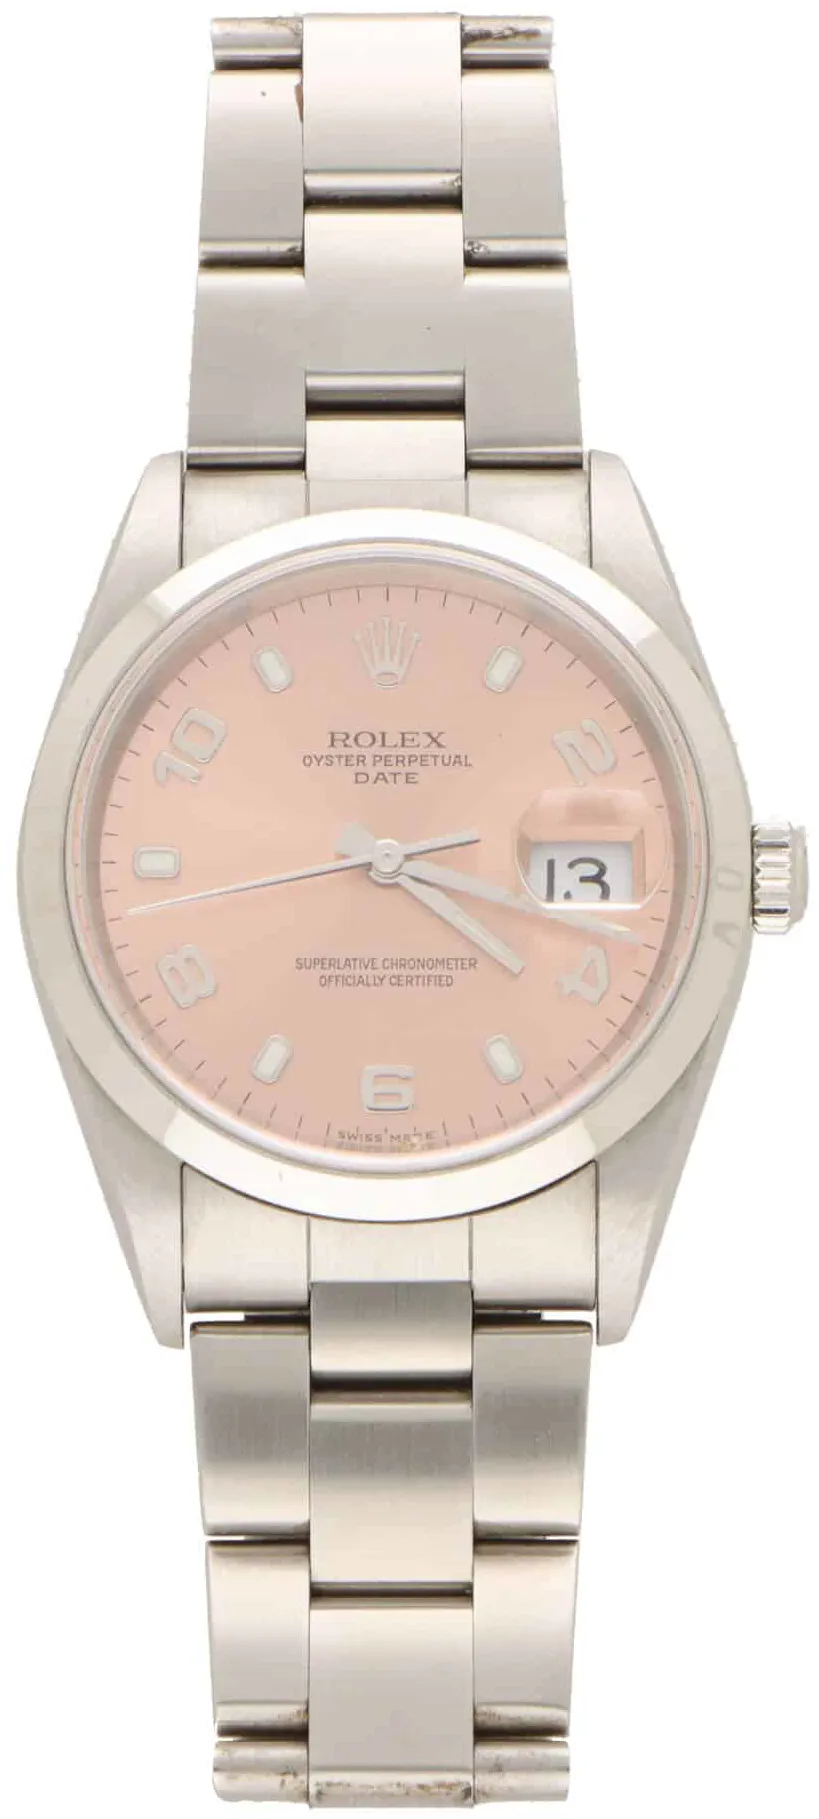 Rolex Oyster Perpetual Date 15200 34mm Stainless steel Rose